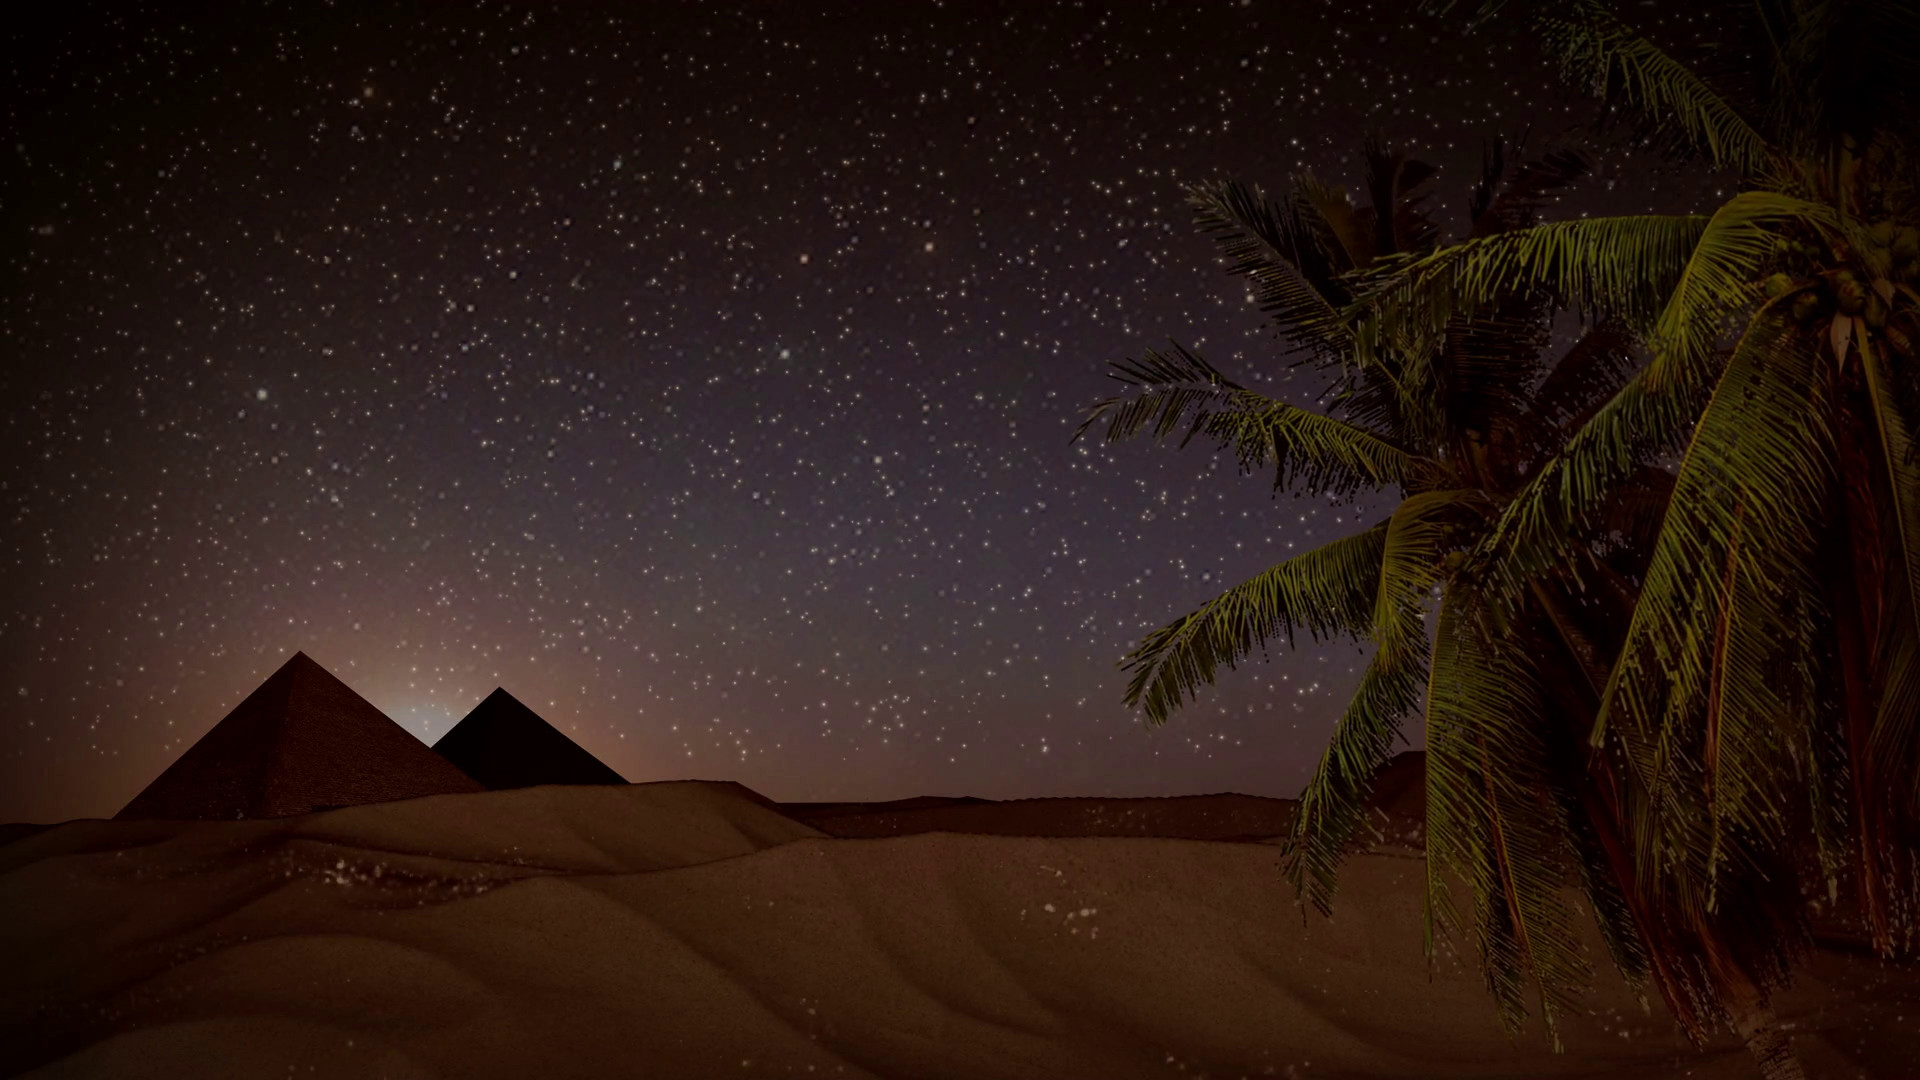 1920x1080 Seamless animation desert sand storm at night with palm trees, shining  stars, and pyramids background landscape with sand hills desert in 4k ultra  HD Motion ...